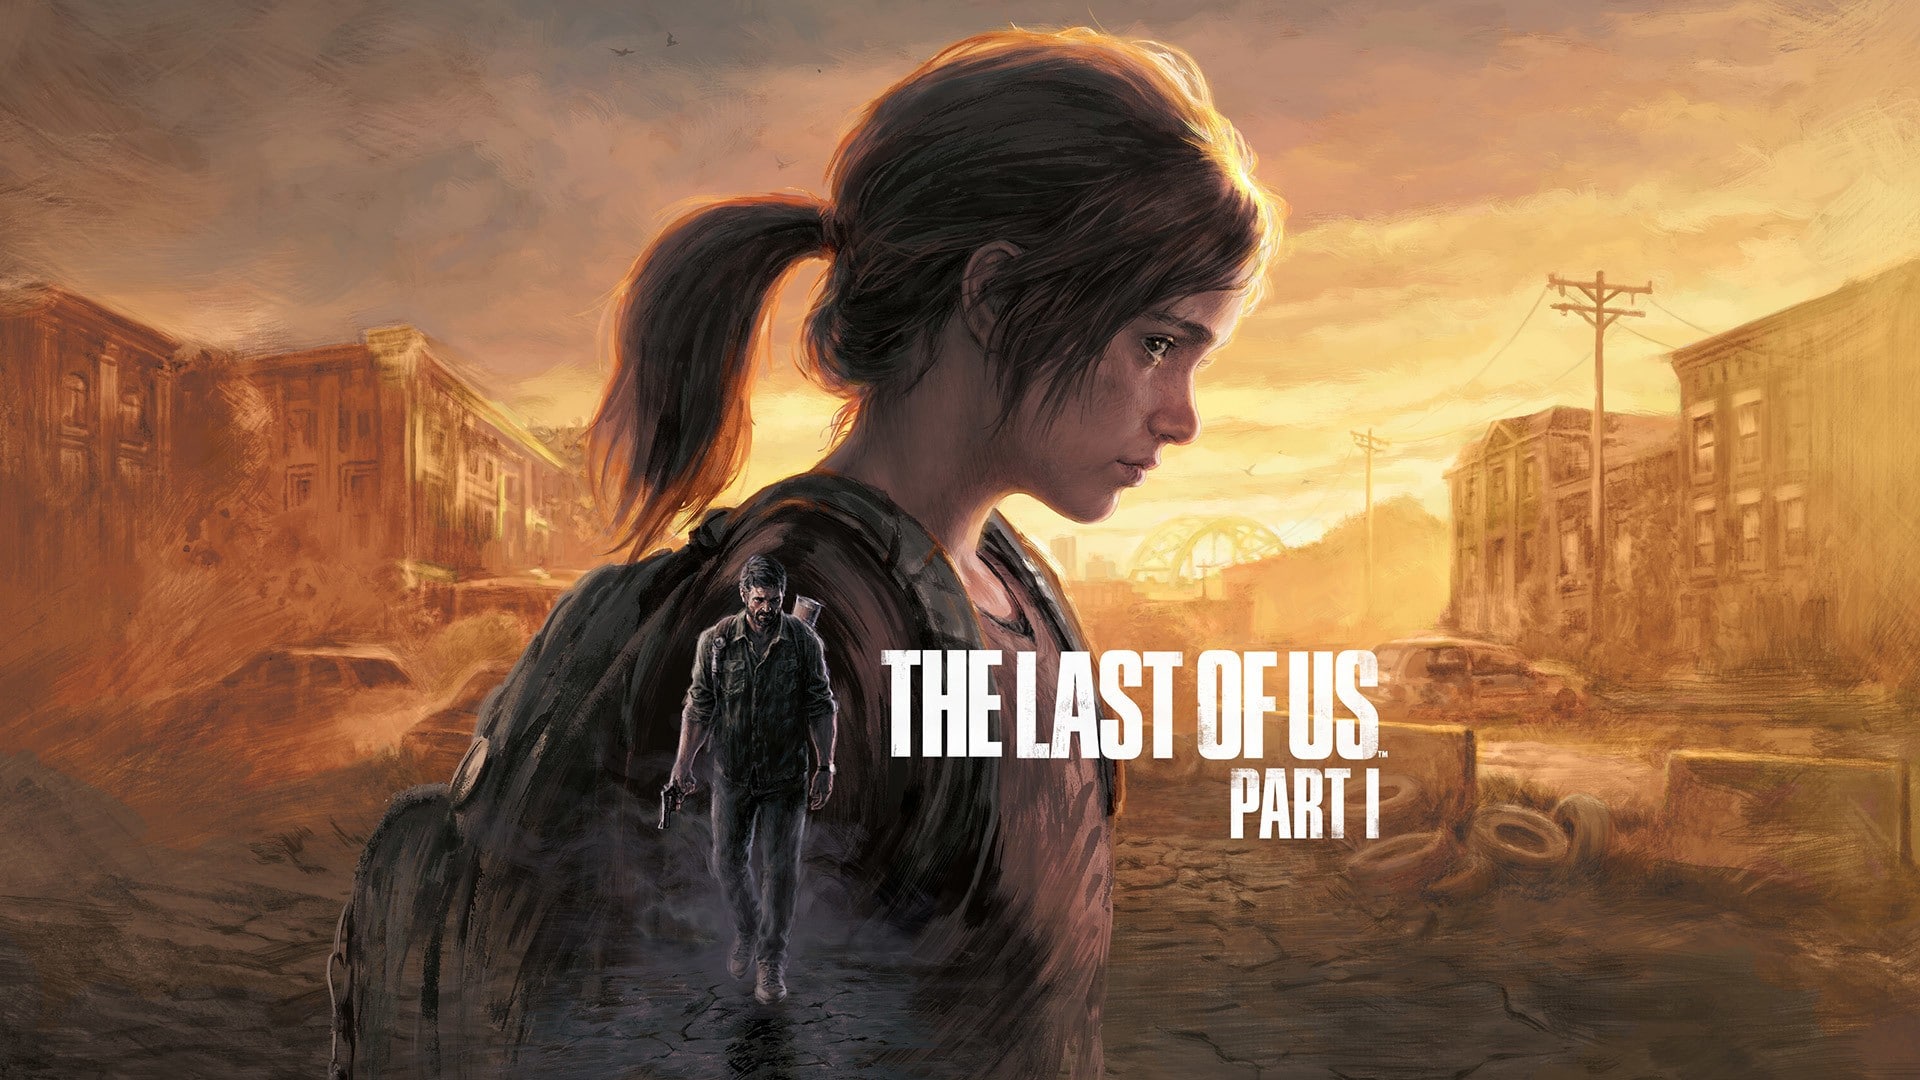 Review: The Last of Us Part I – The Best of Us